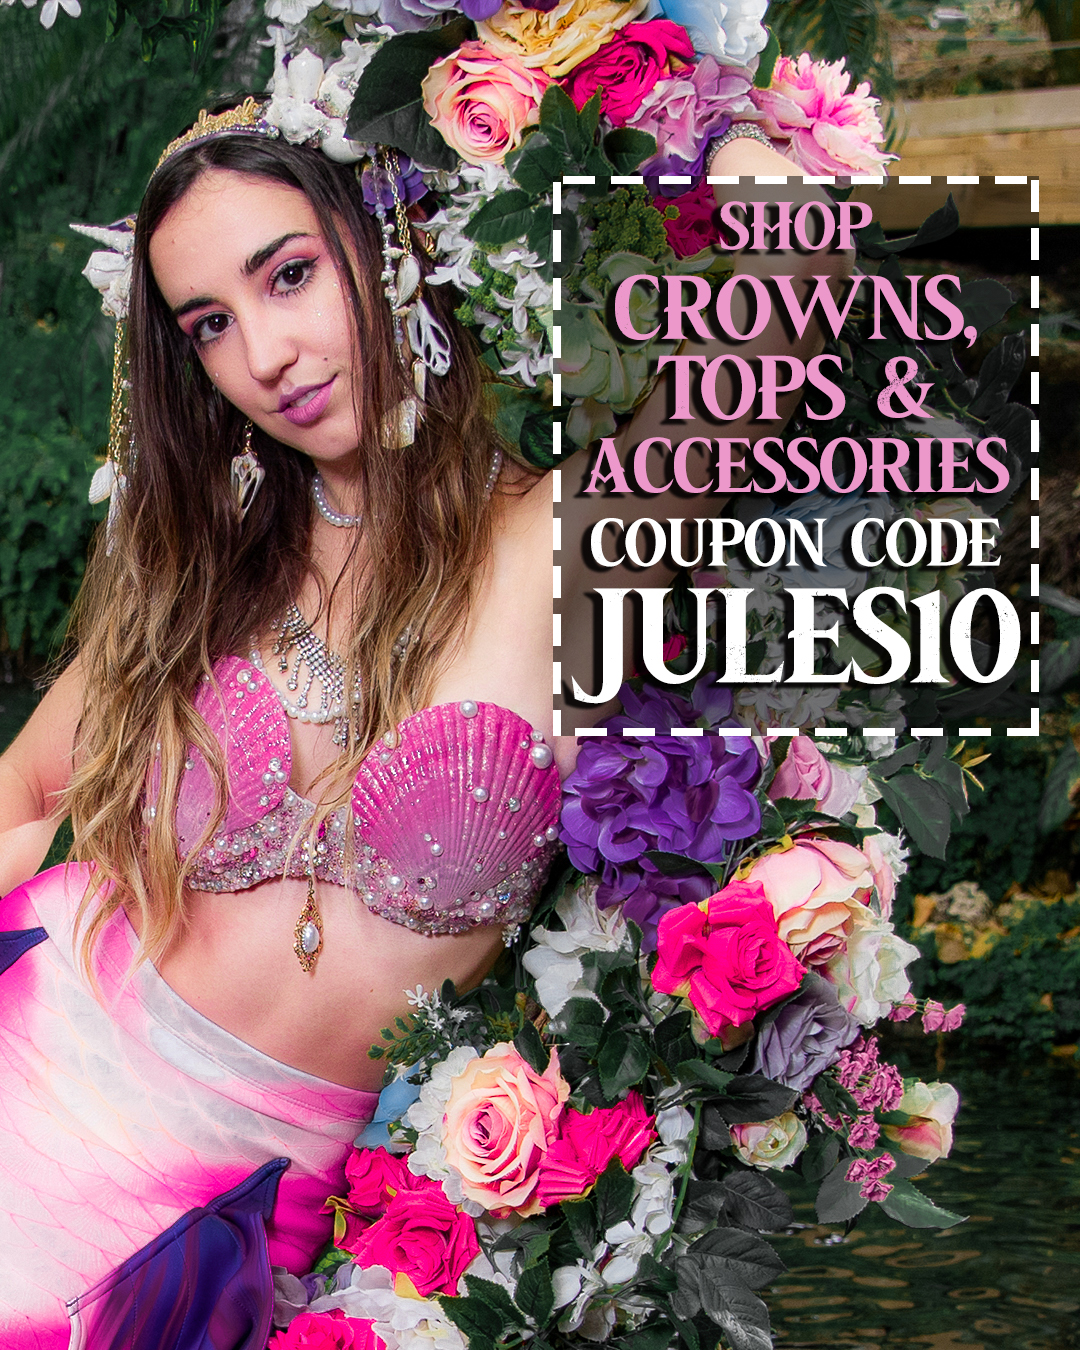 Save on Mermaid tops, crowns and accessories with StarStuff Boutique Coupon: JULES10